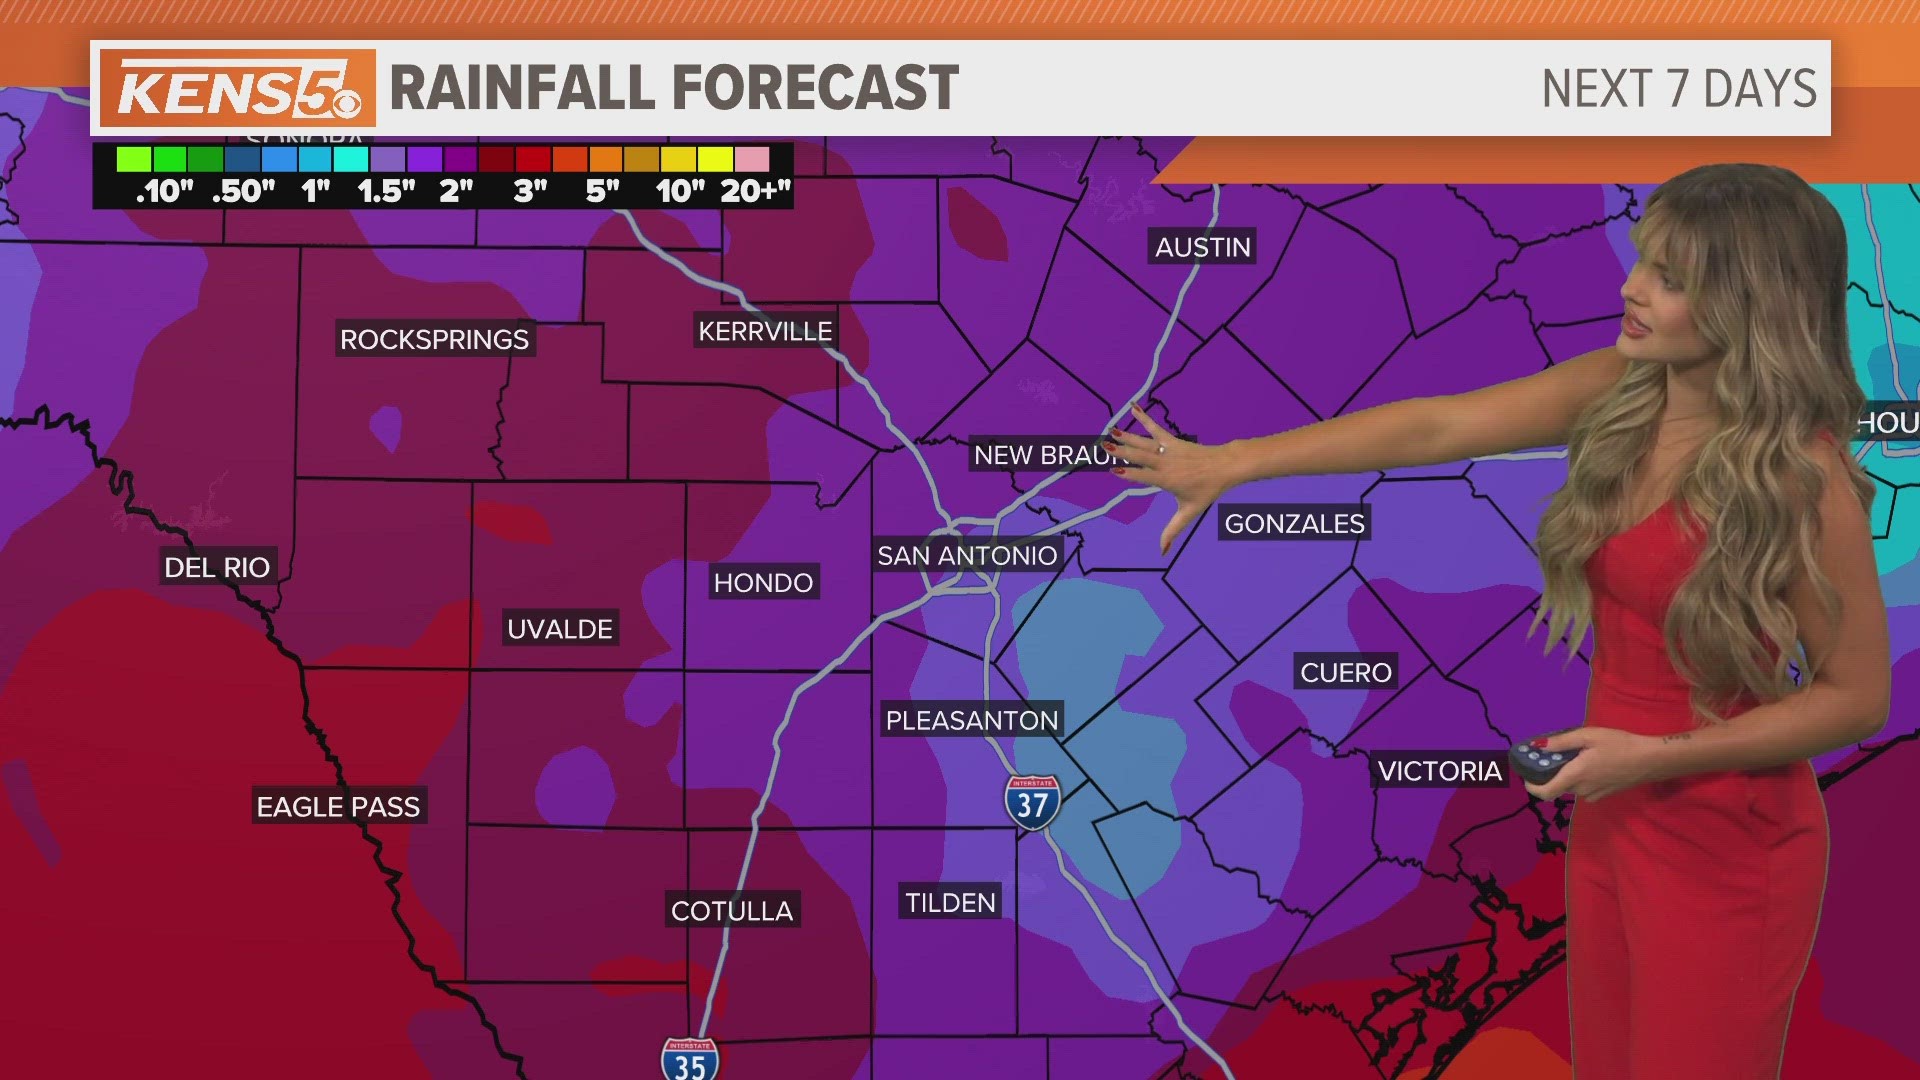 Parts of the Bexar County could see close to two inches of rainfall.